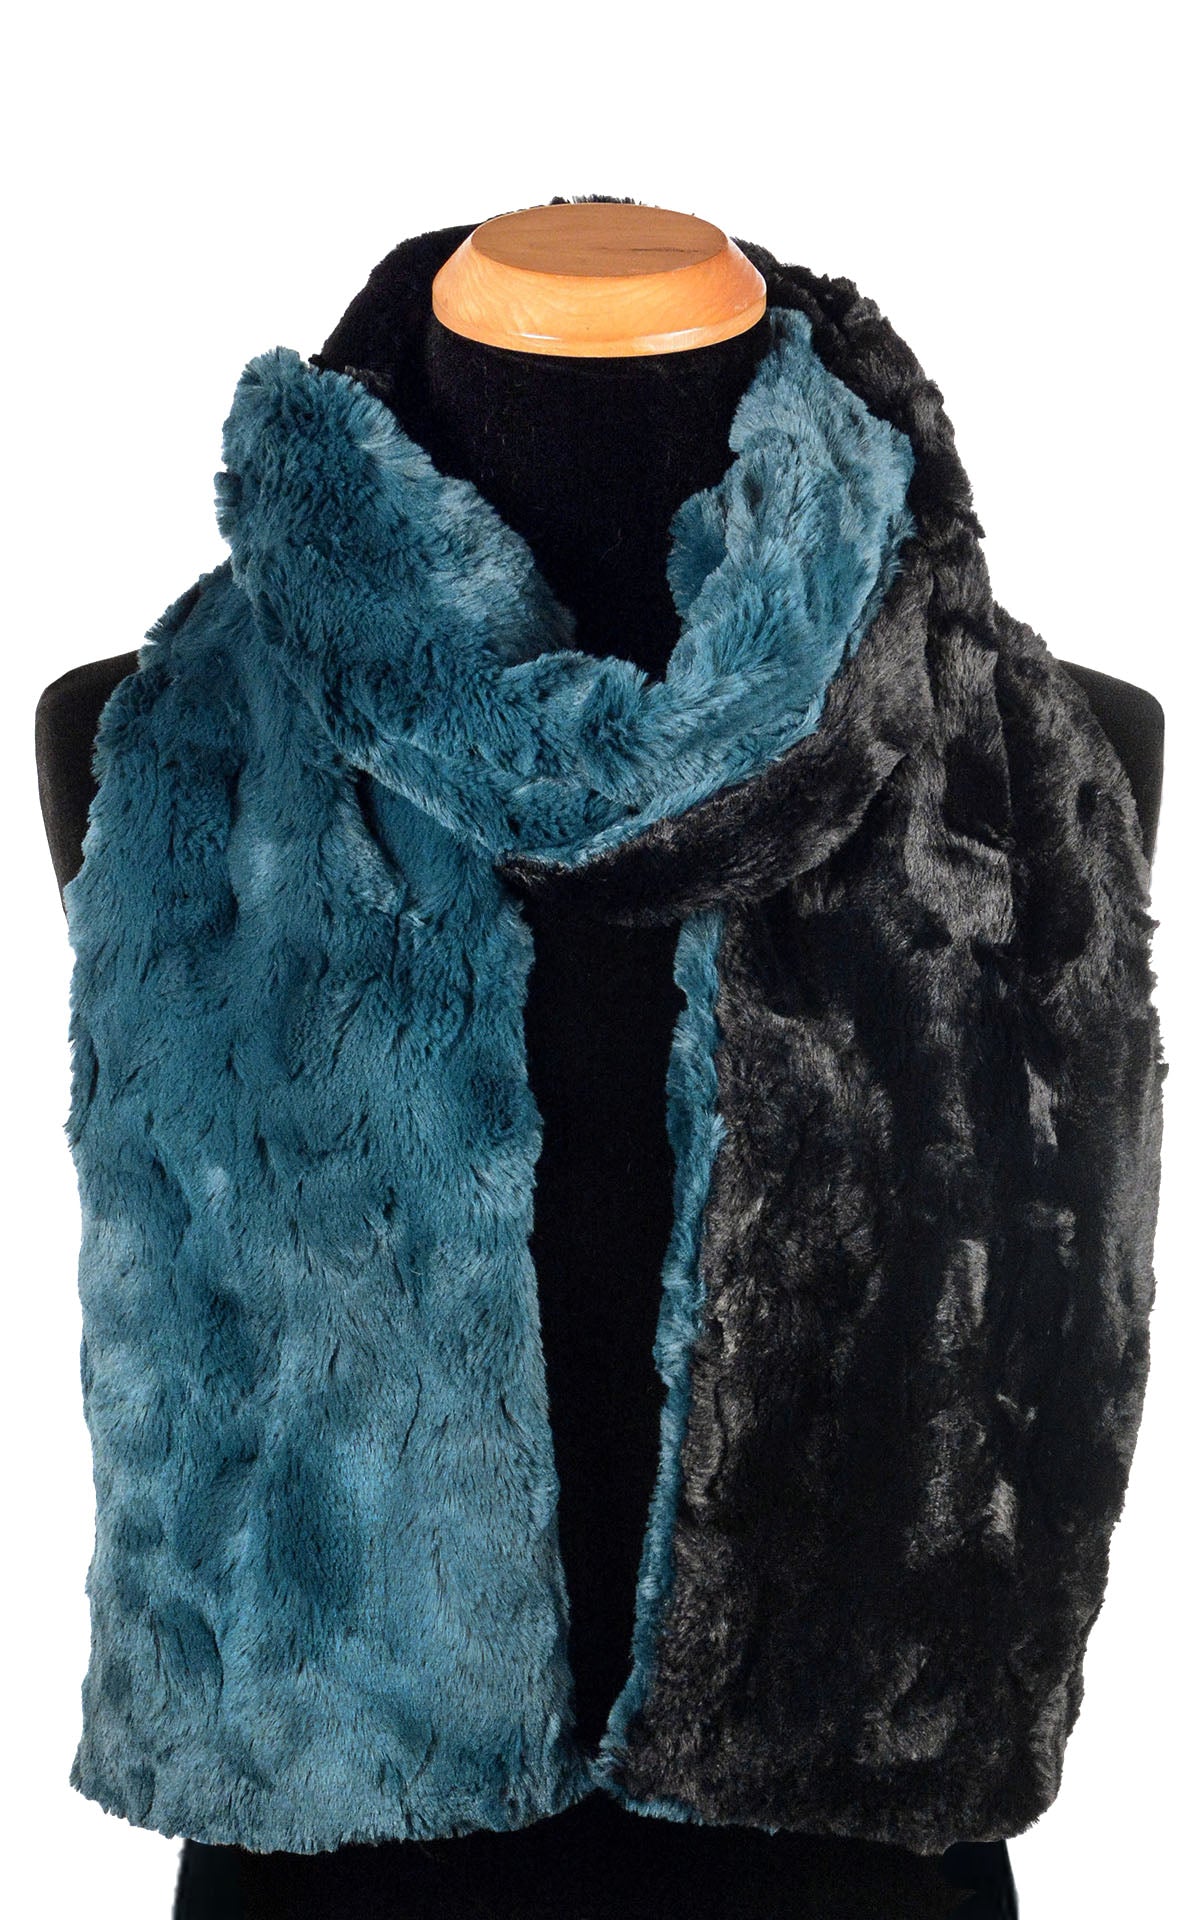 Men’s Product shot on mannequin of Two-tone Classic Scarf | Peacock Pond blue/teal Faux Fur with cuddly black | Handmade by Pandemonium Millinery Seattle, WA USA